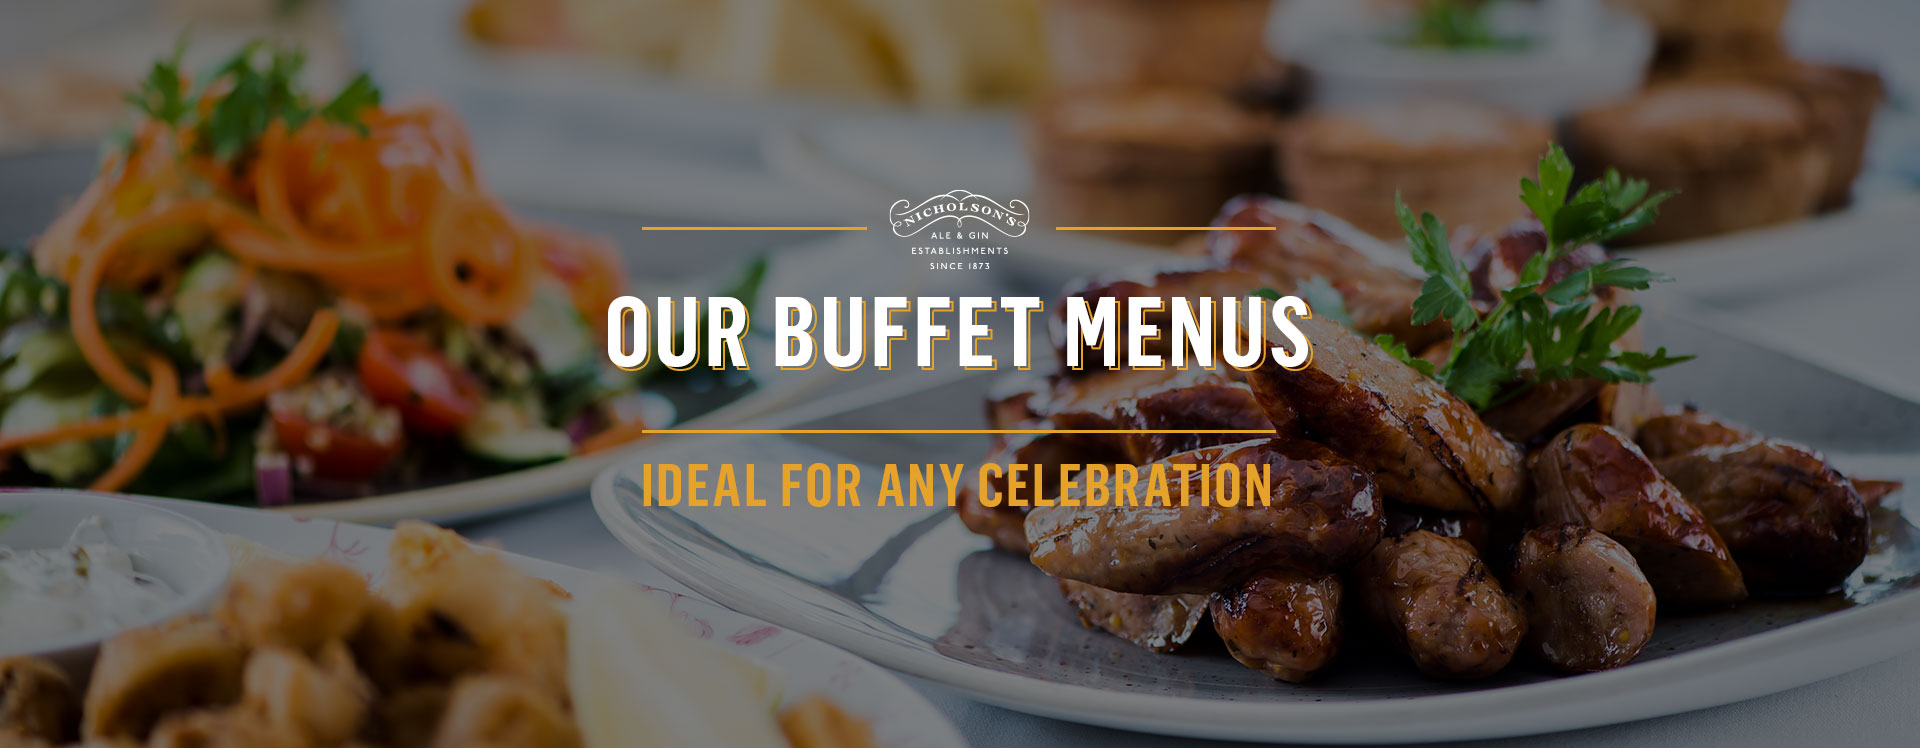 Buffet menu at The White Horse - Book a table